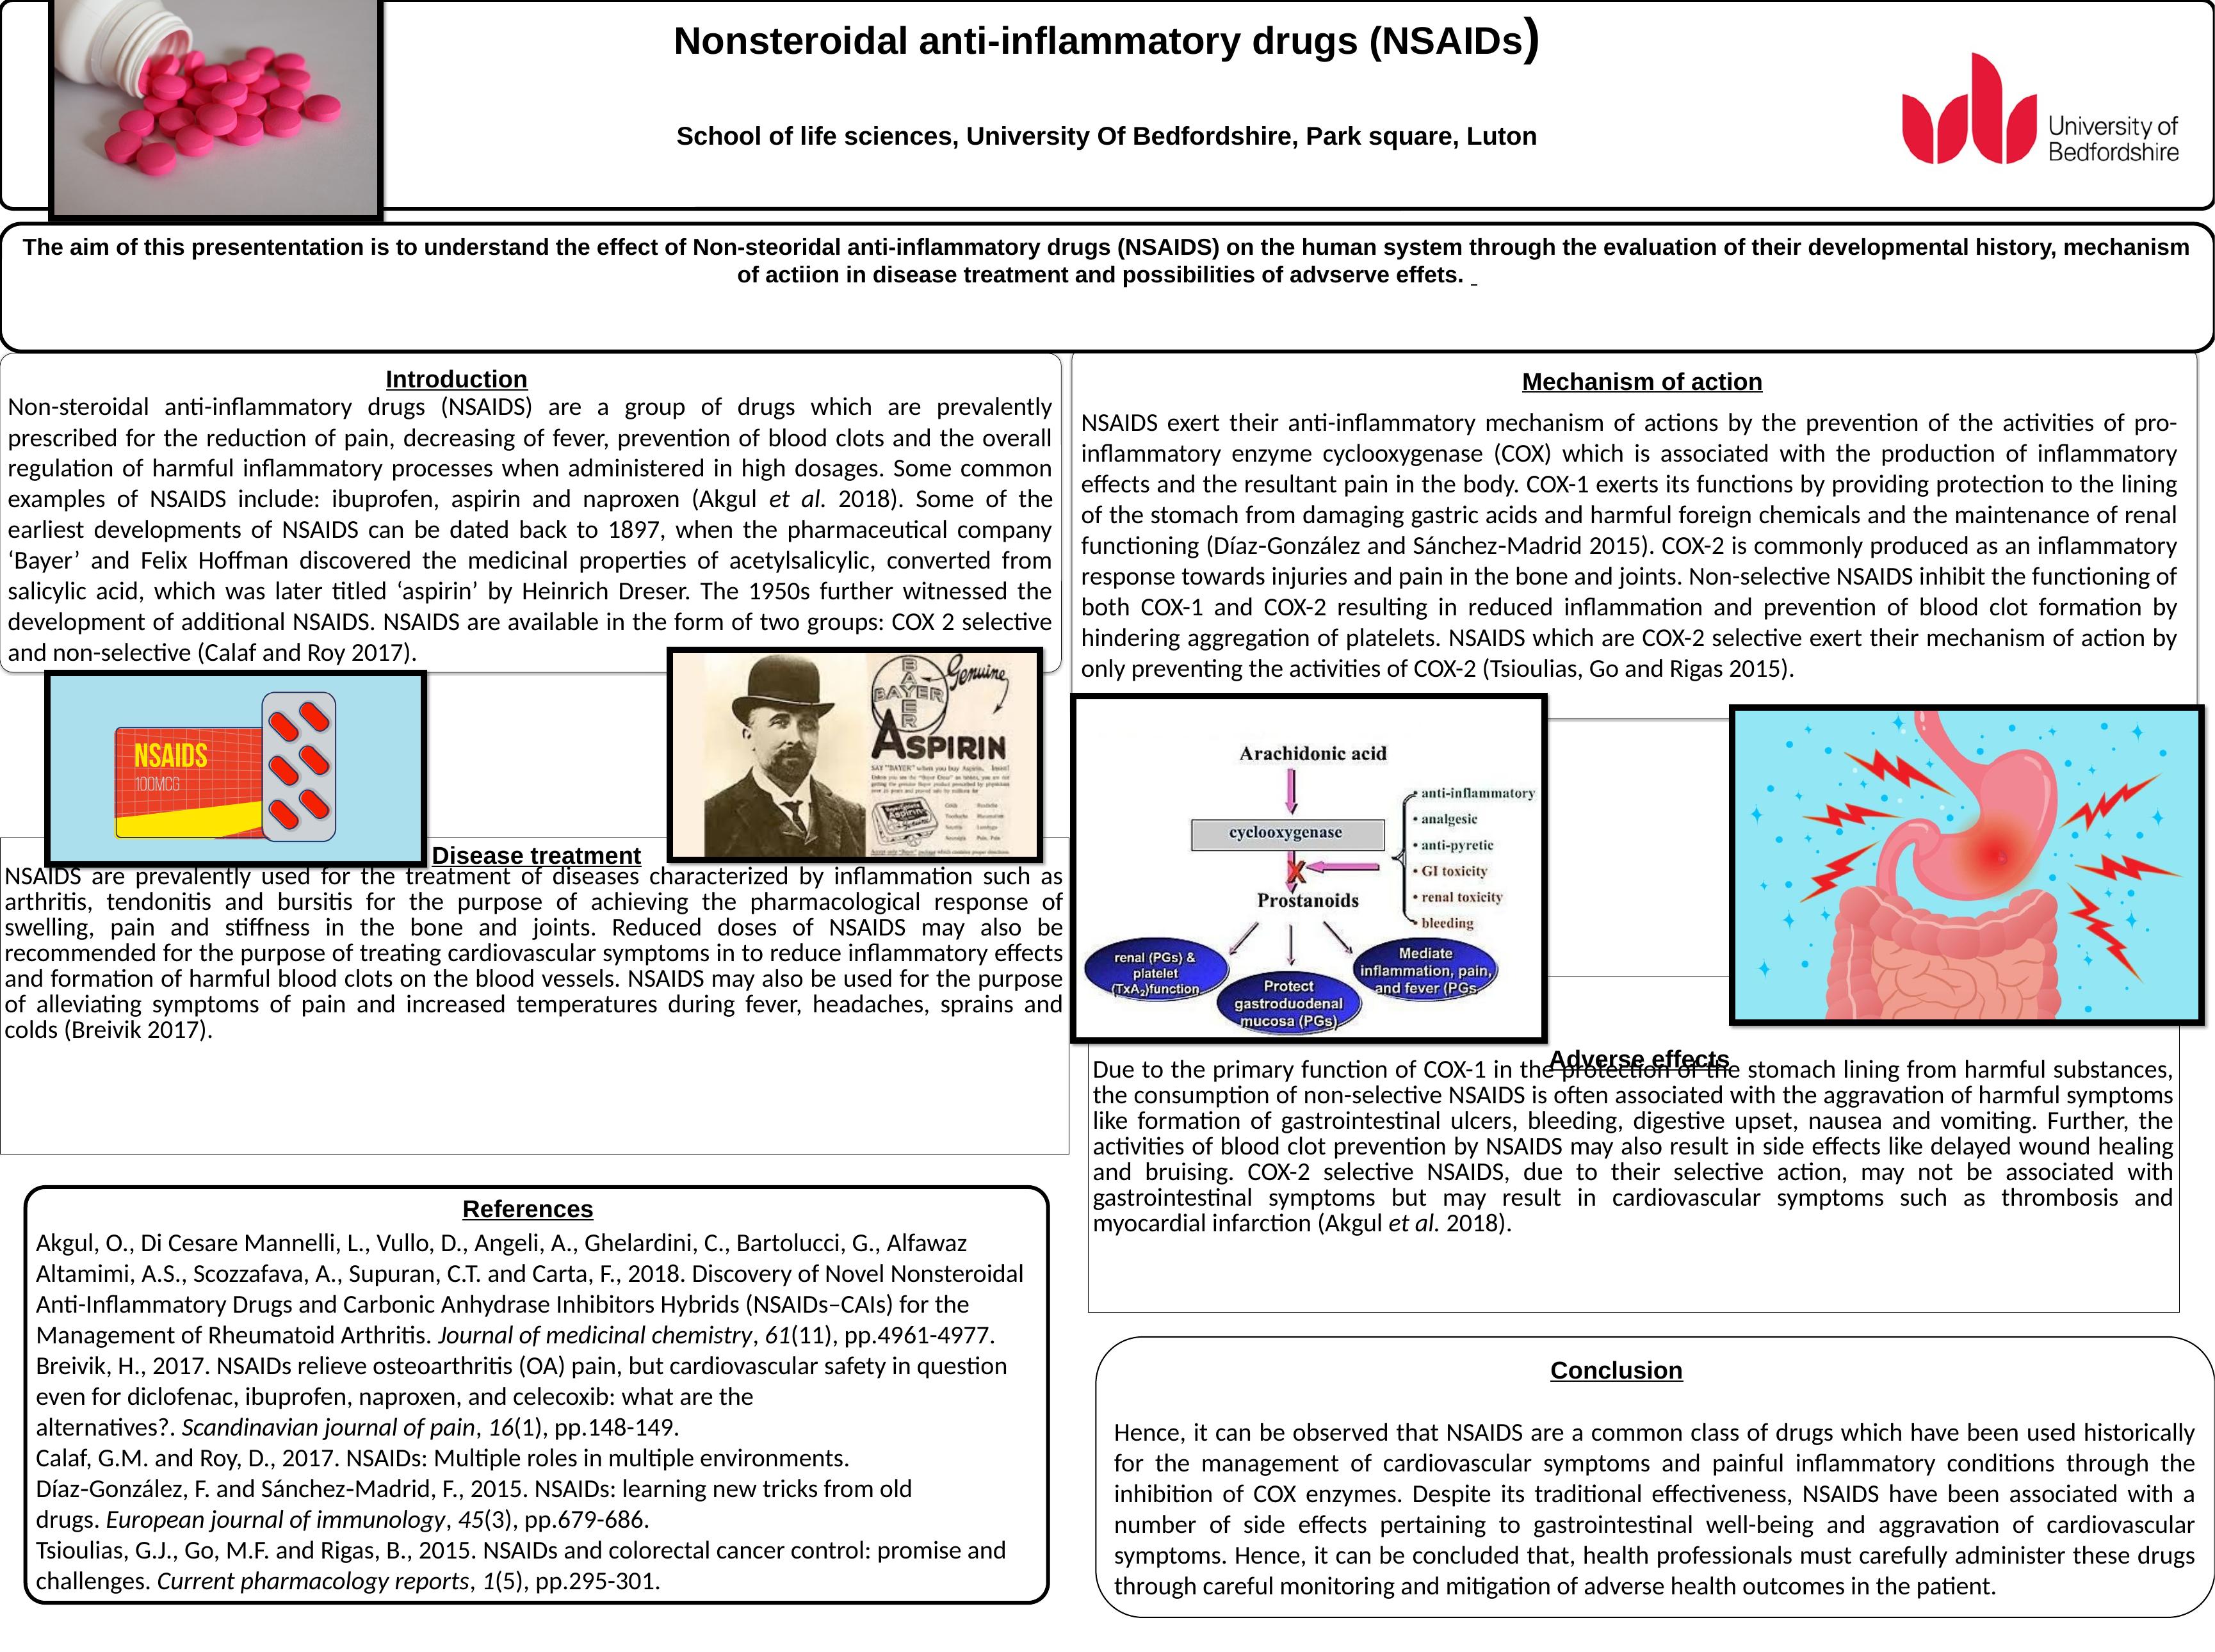 Effect of Nonsteroidal Anti-Inflammatory Drugs (NSAIDs) on the Human System_1